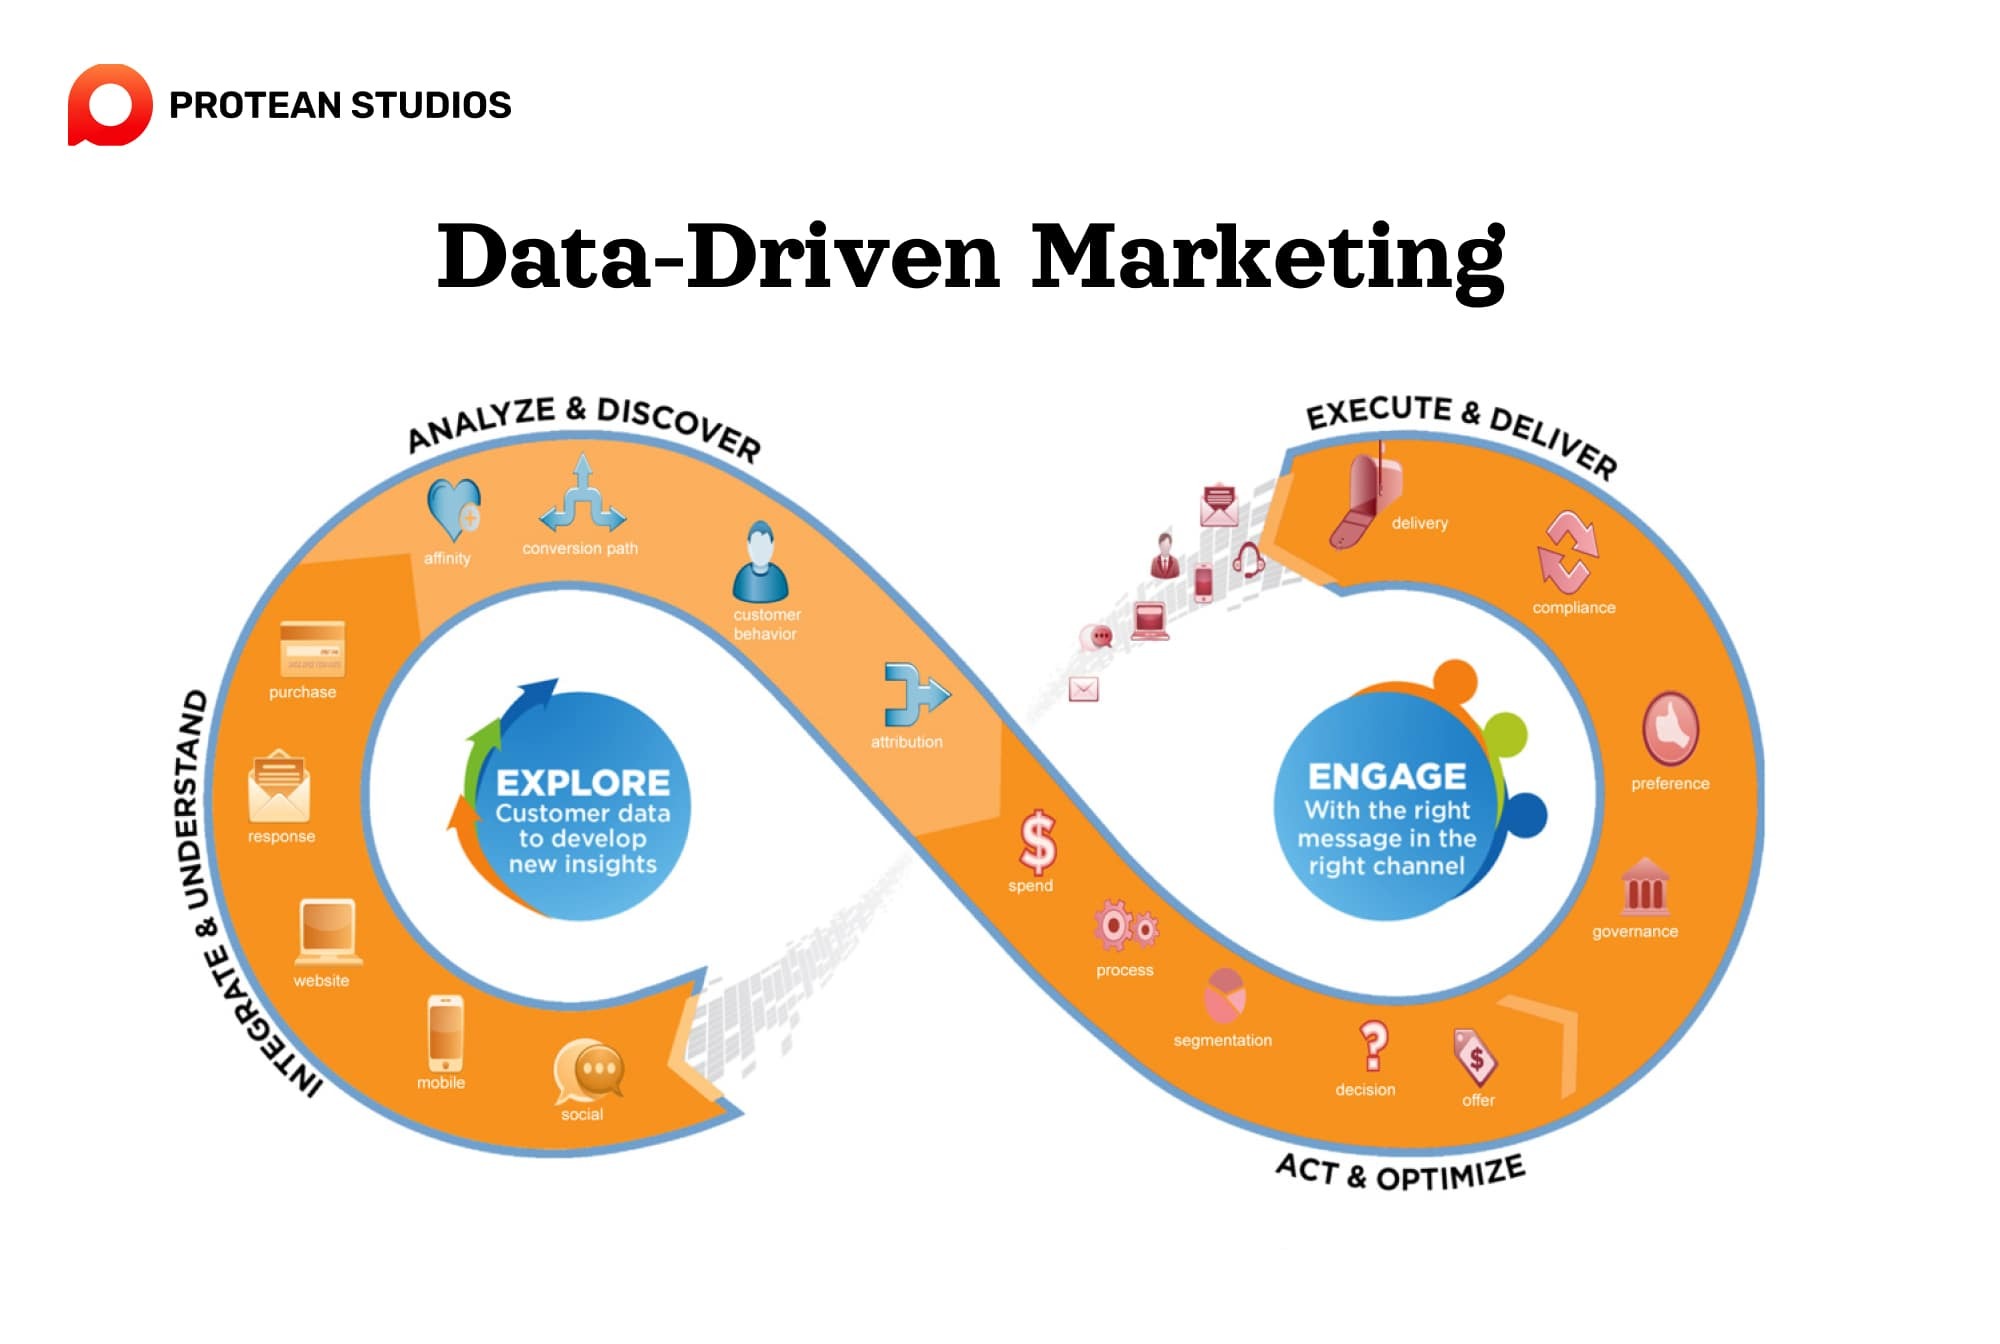 Basic features of data-driven marketing